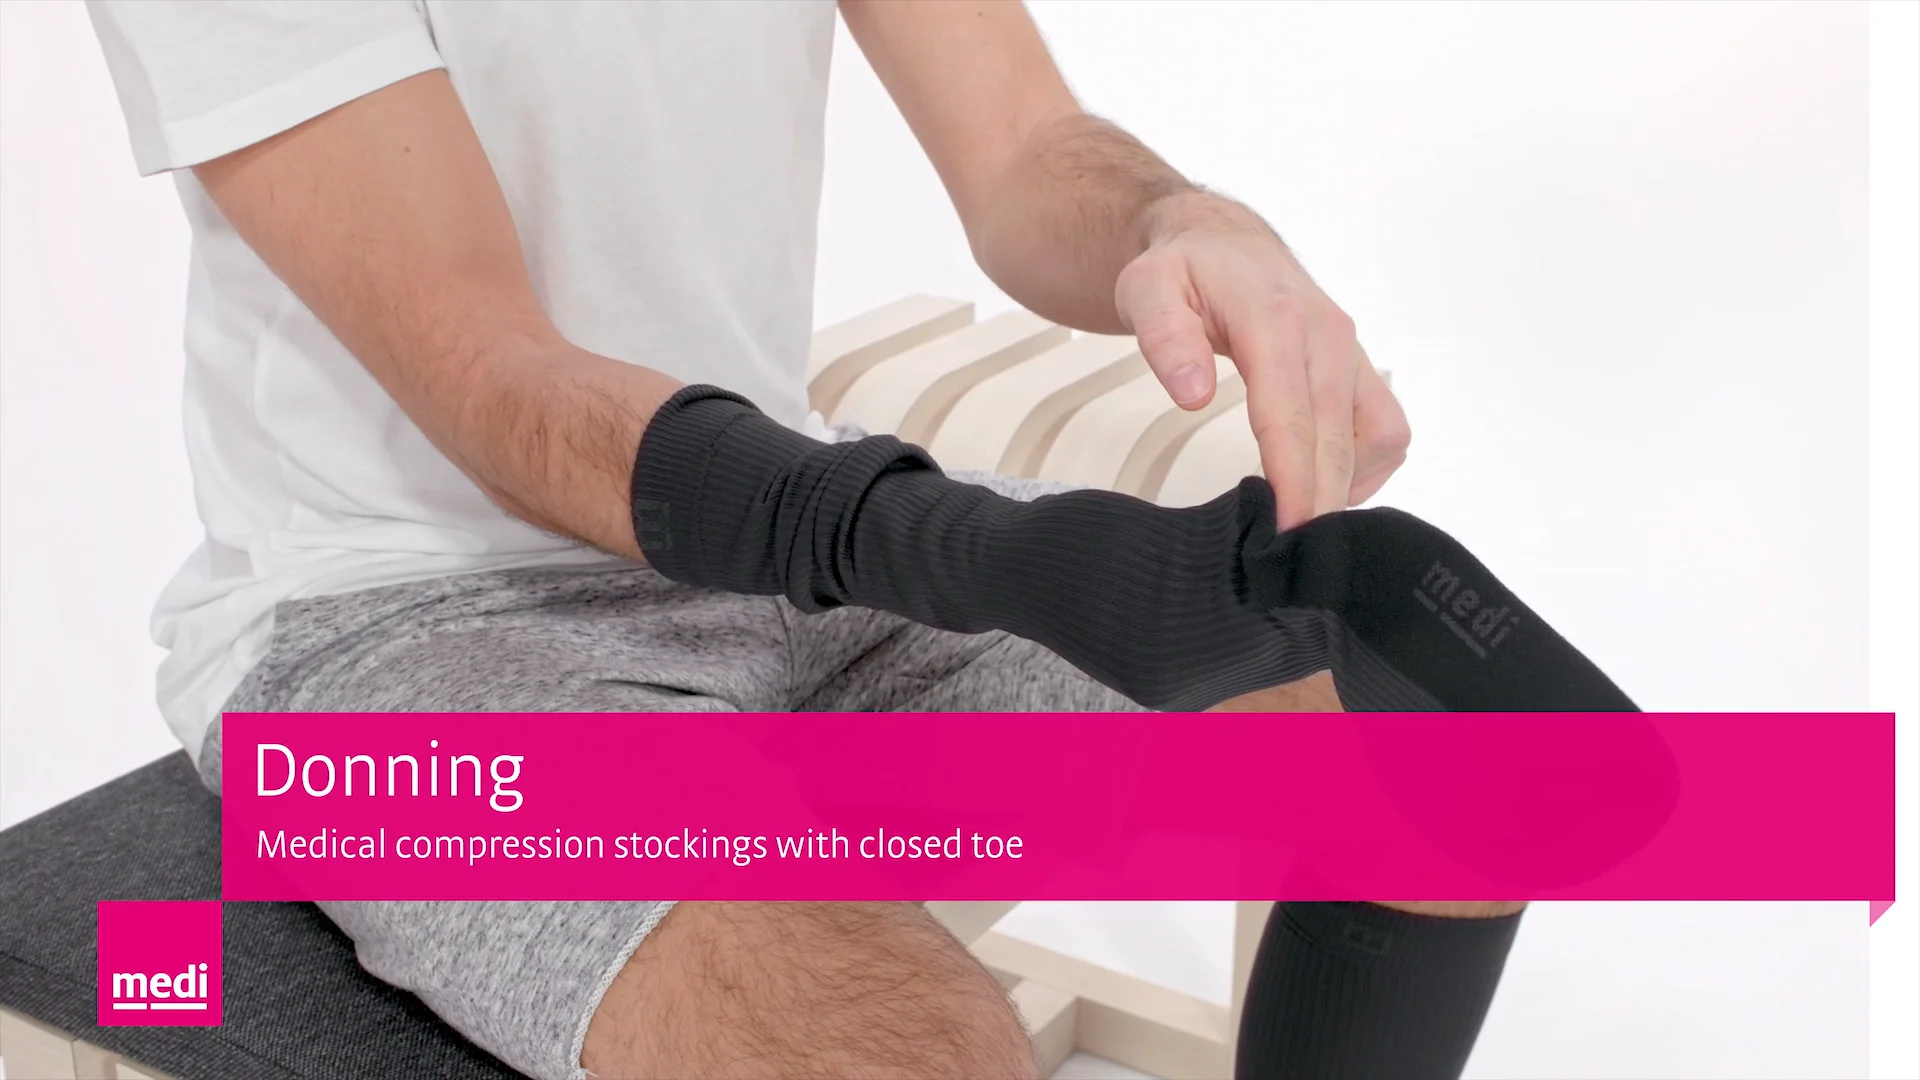 Donning medical compression stockings, closed toe (AD) on Vimeo